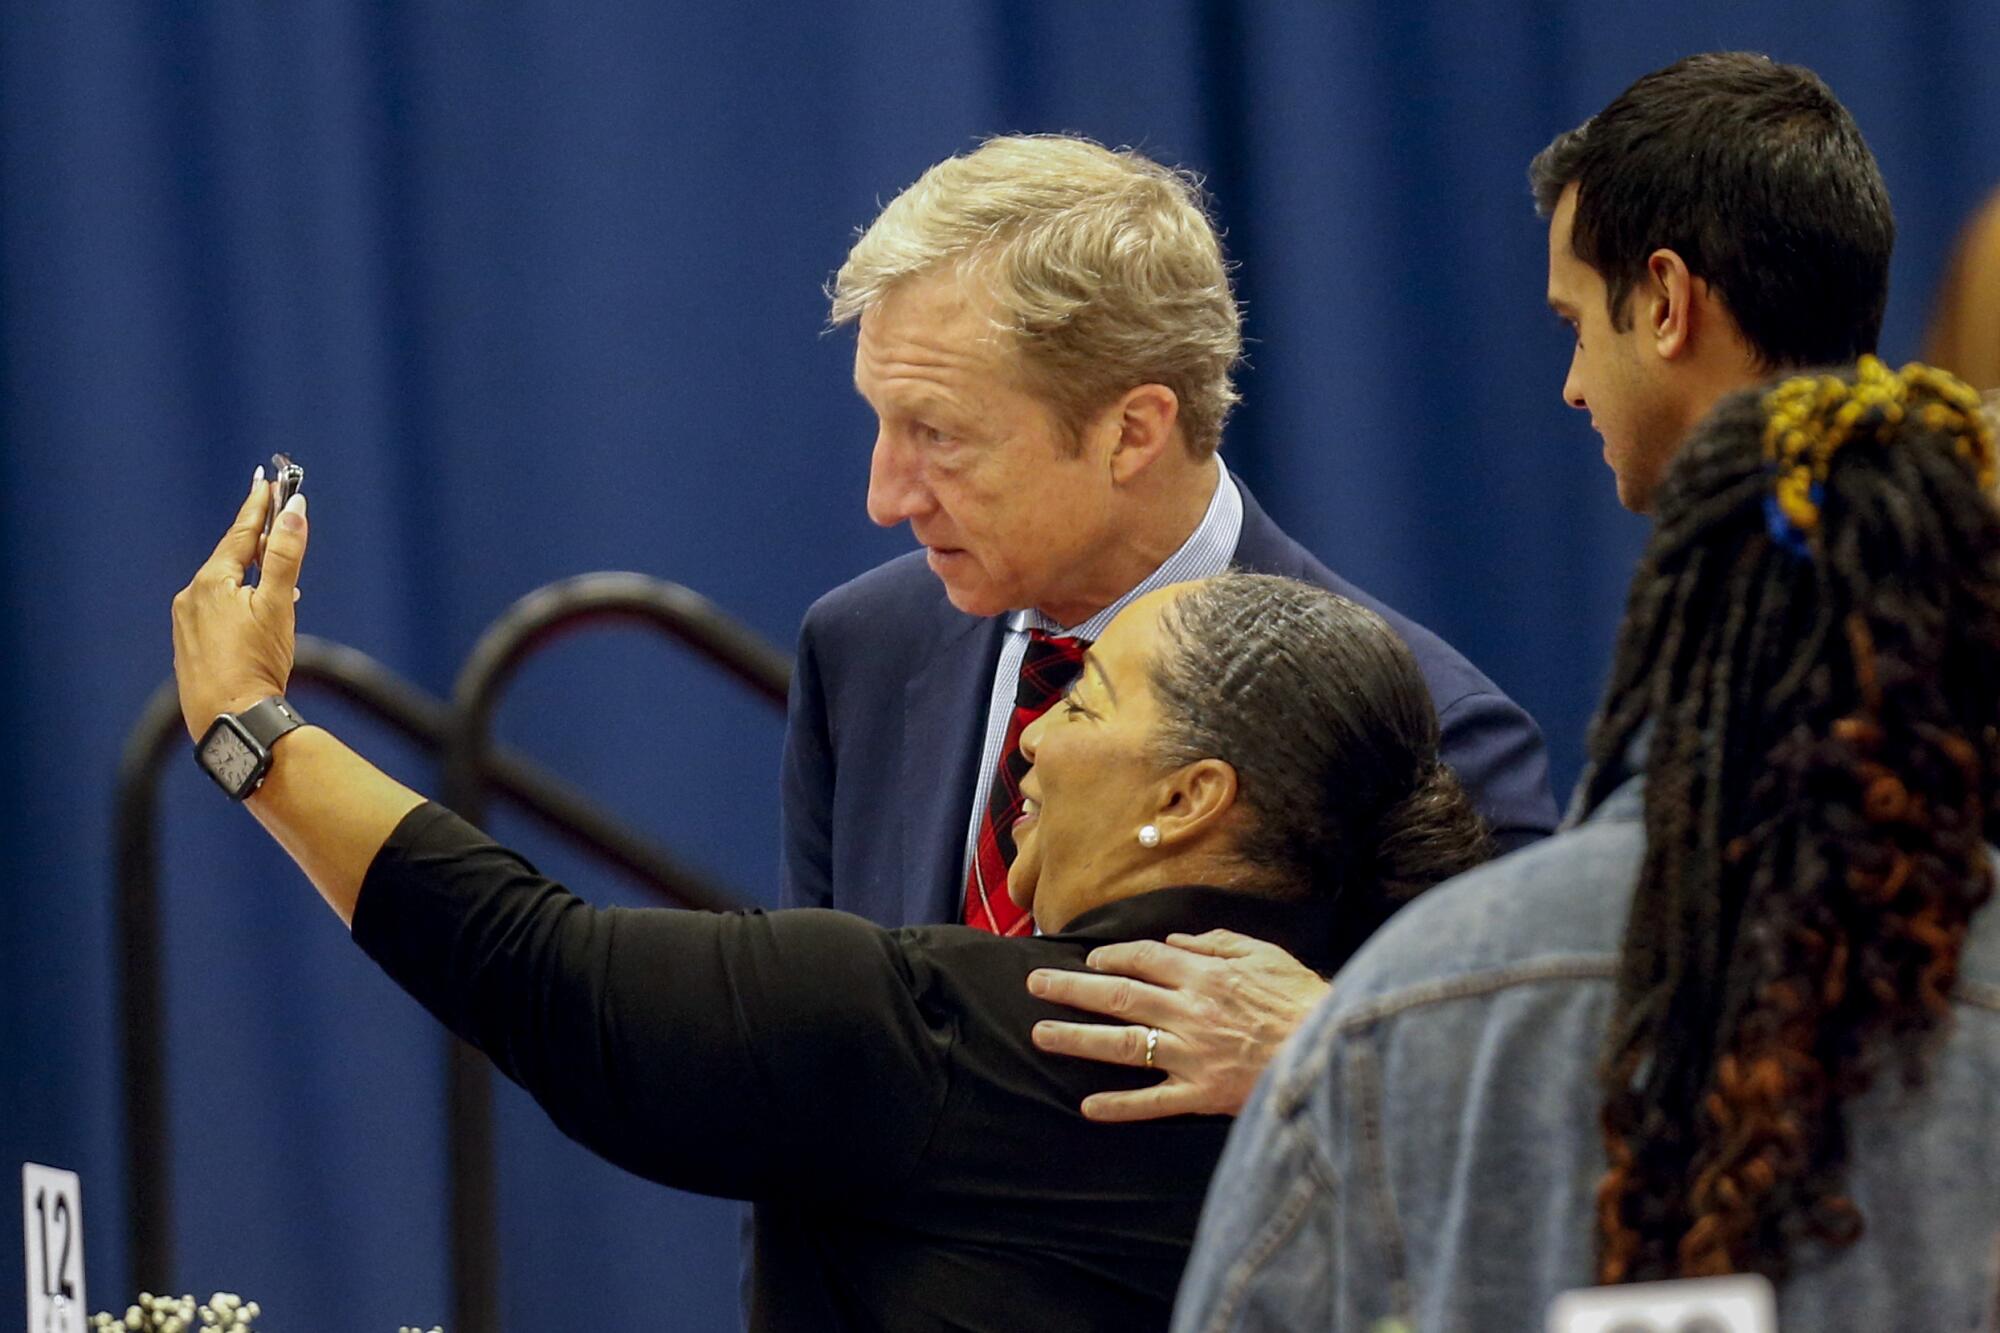 Tom Steyer wearing a dark blue suit and side-hugging a guest as they take a selfie